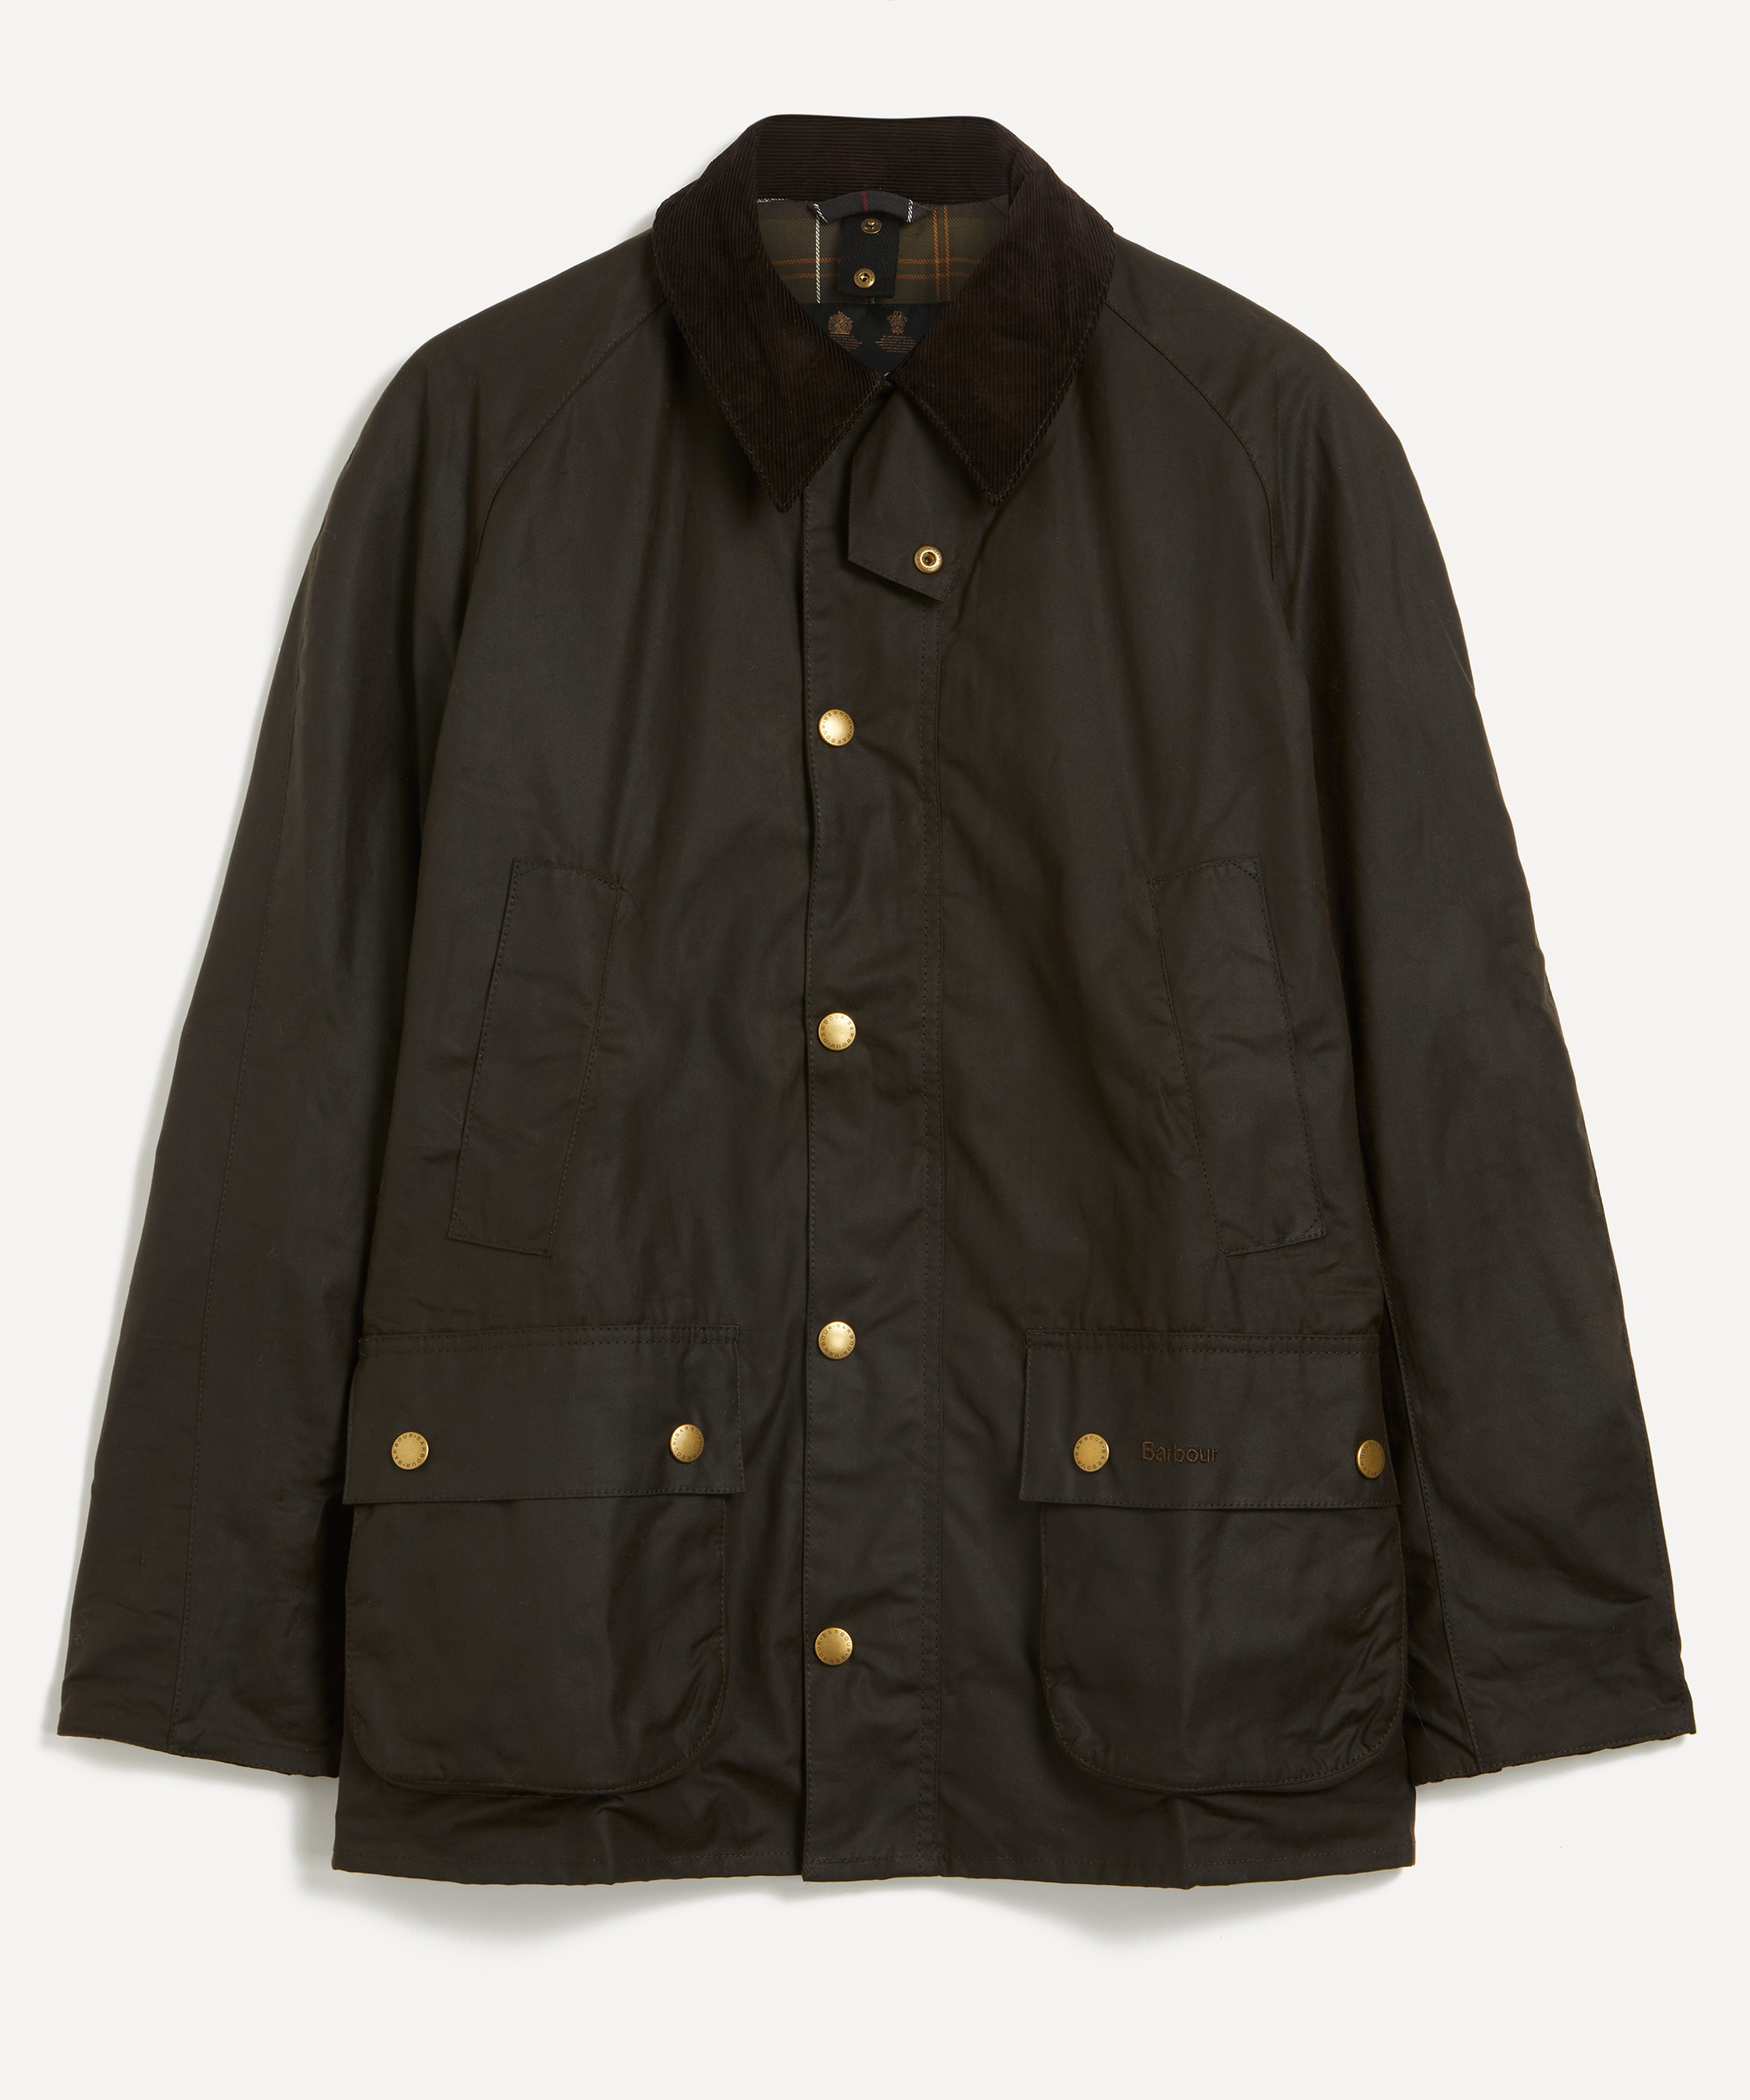 Barbour - Ashby Olives Waxed Jacket